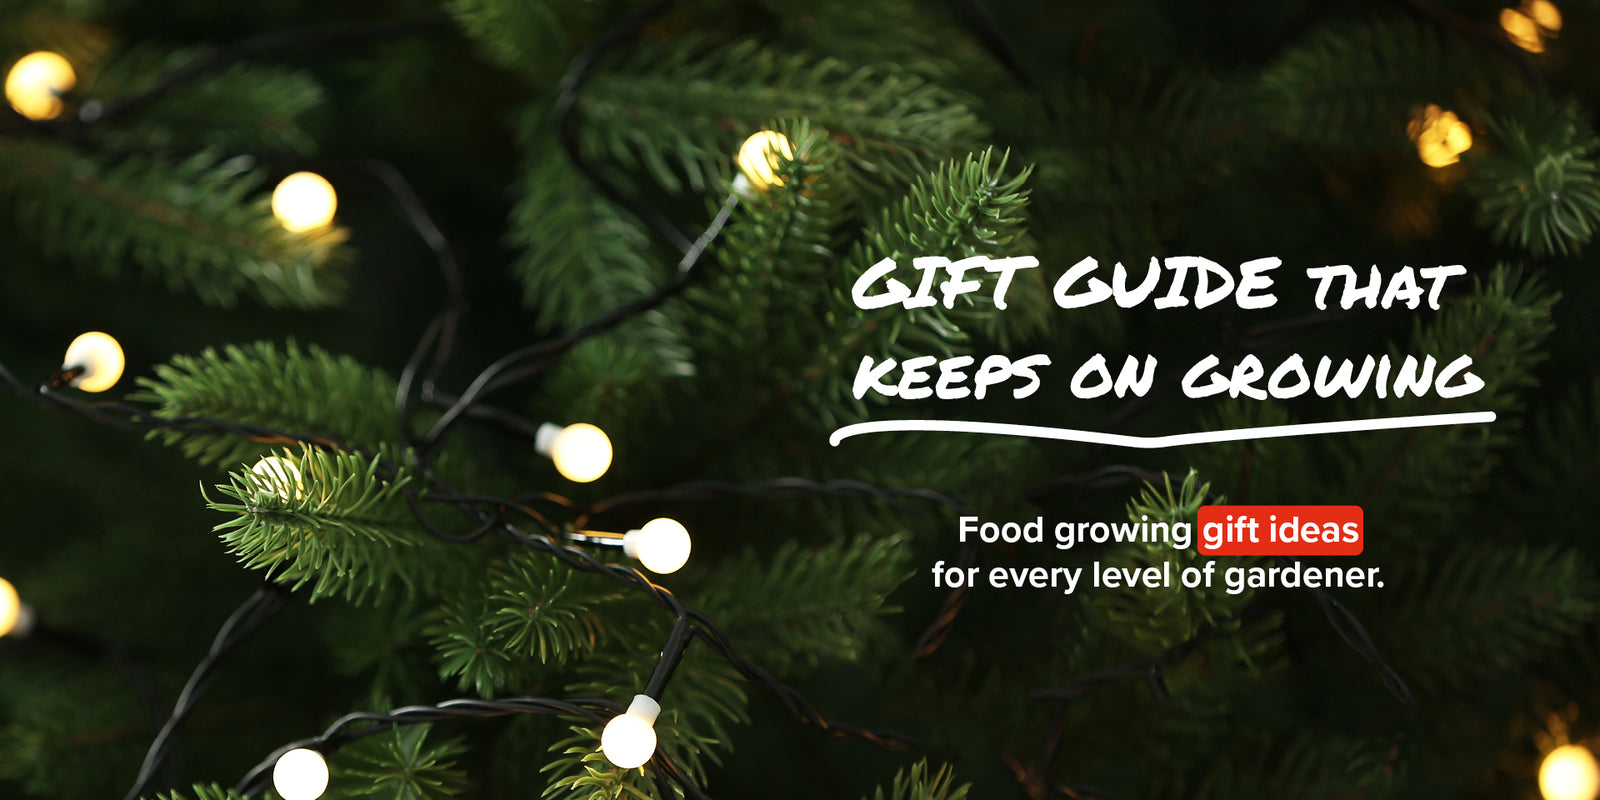 Food growing gift ideas for every gardener